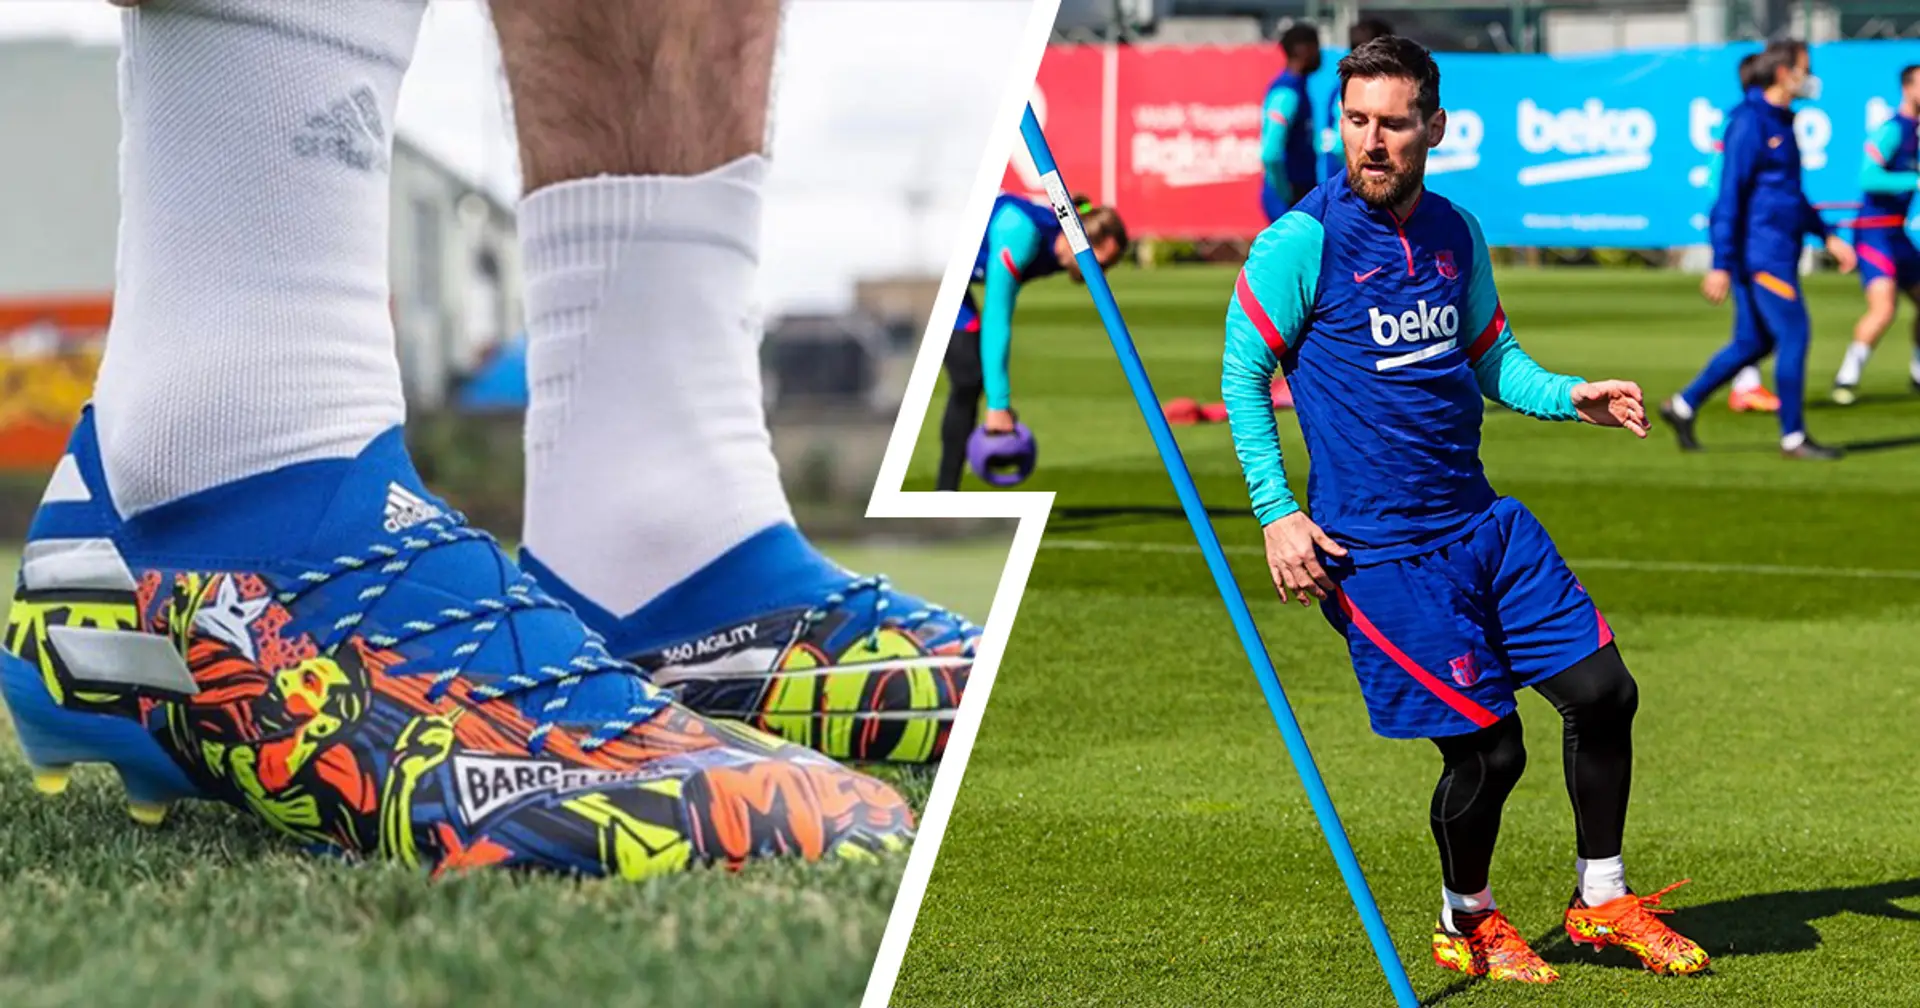 Messi shows off brand new Adidas boots in 2020/21 season: price, design and other things to know Football | Tribuna.com